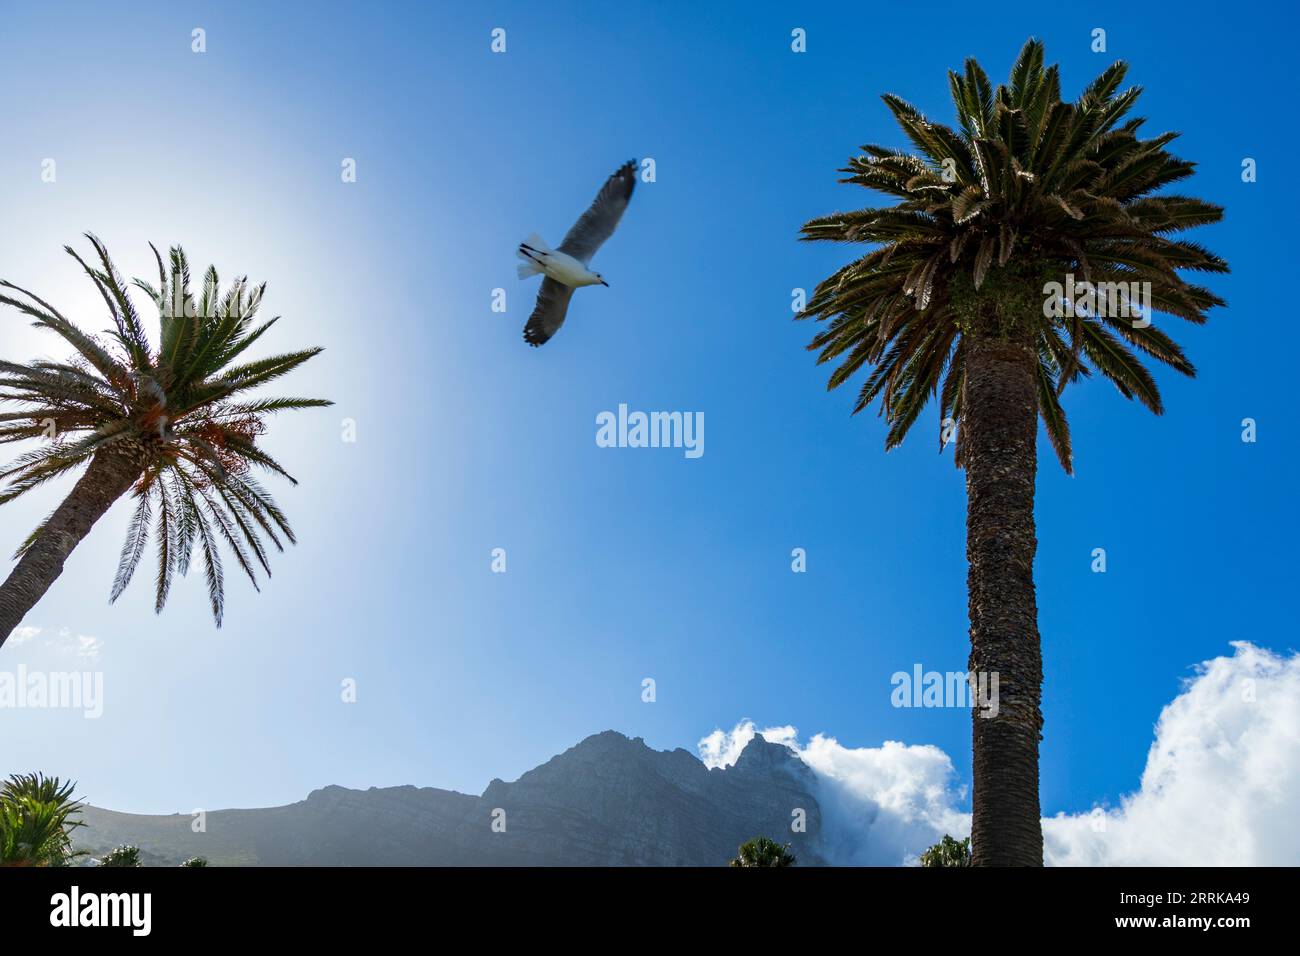 South Africa, Cape Town, seagull in flight, Table Mountain, palm trees, blue sky Stock Photo